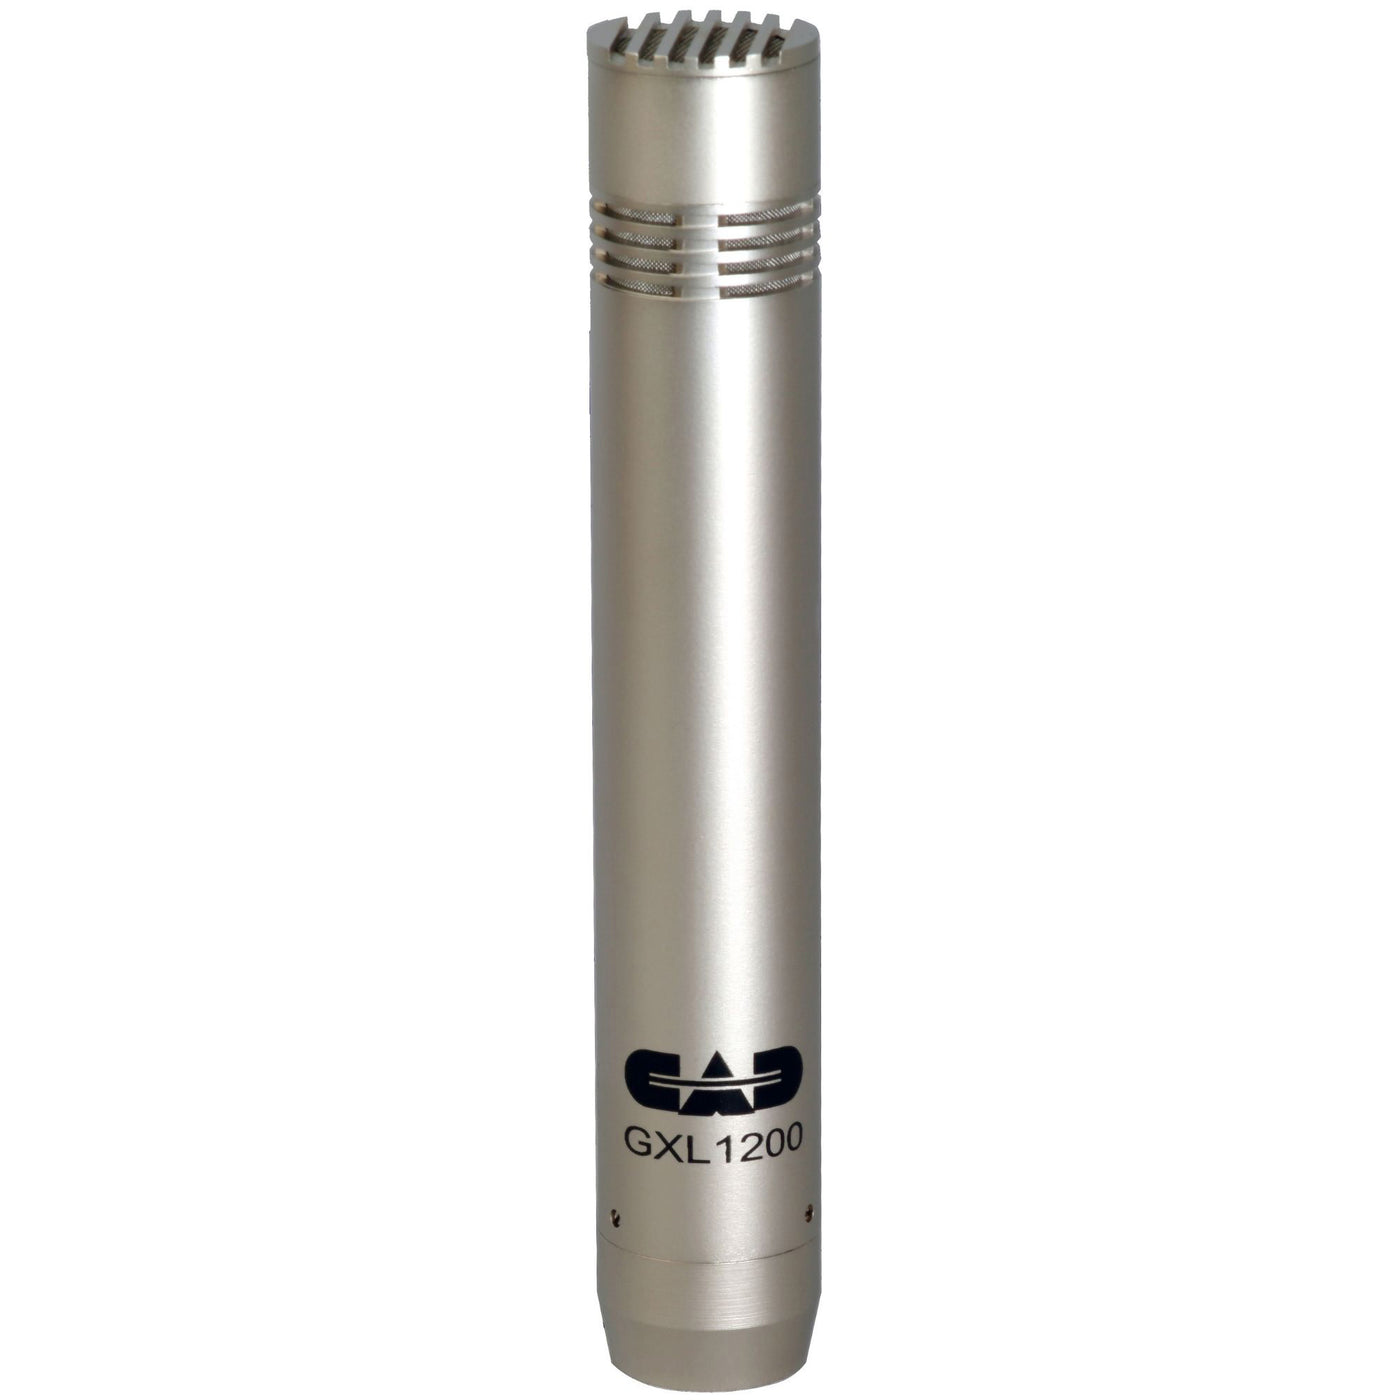 CAD Audio GXL1200 Small Diaphragm Cardioid Condenser Microphone (GXL1200)